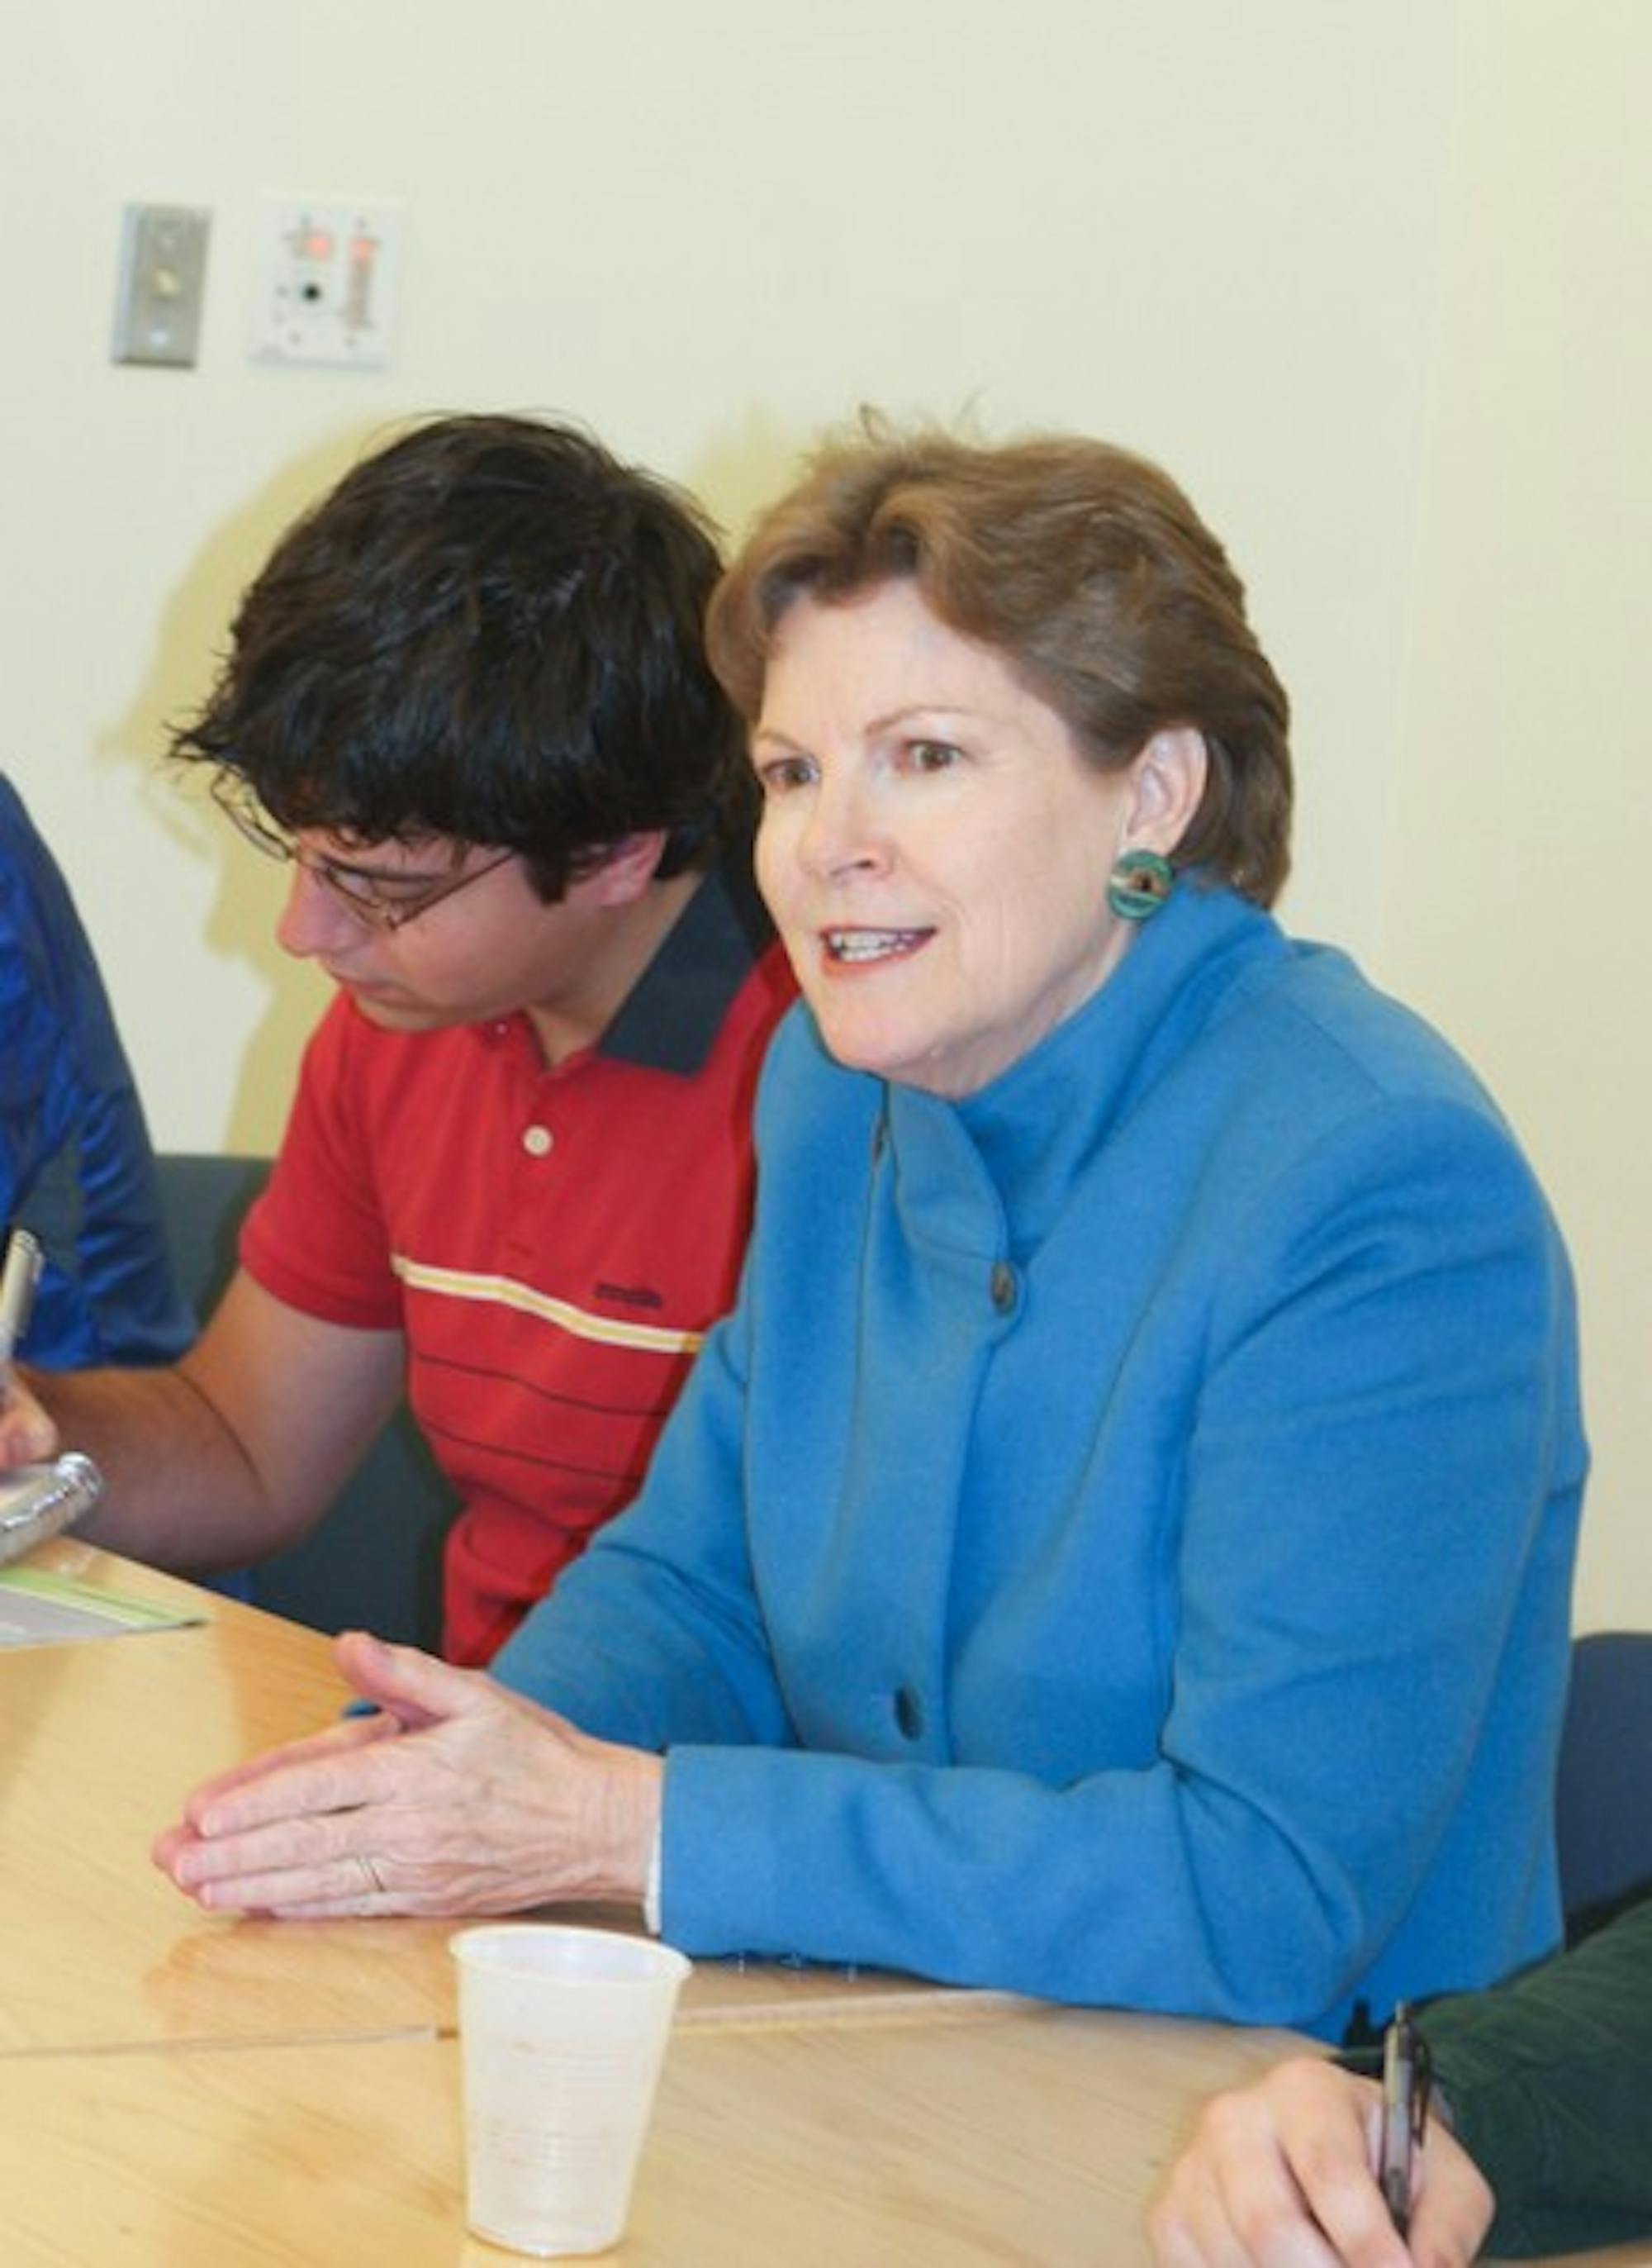 Former New Hampshire Governor and current candidate for the United States Senate Jeanne Shaheen met with Dartmouth students on Thursday.